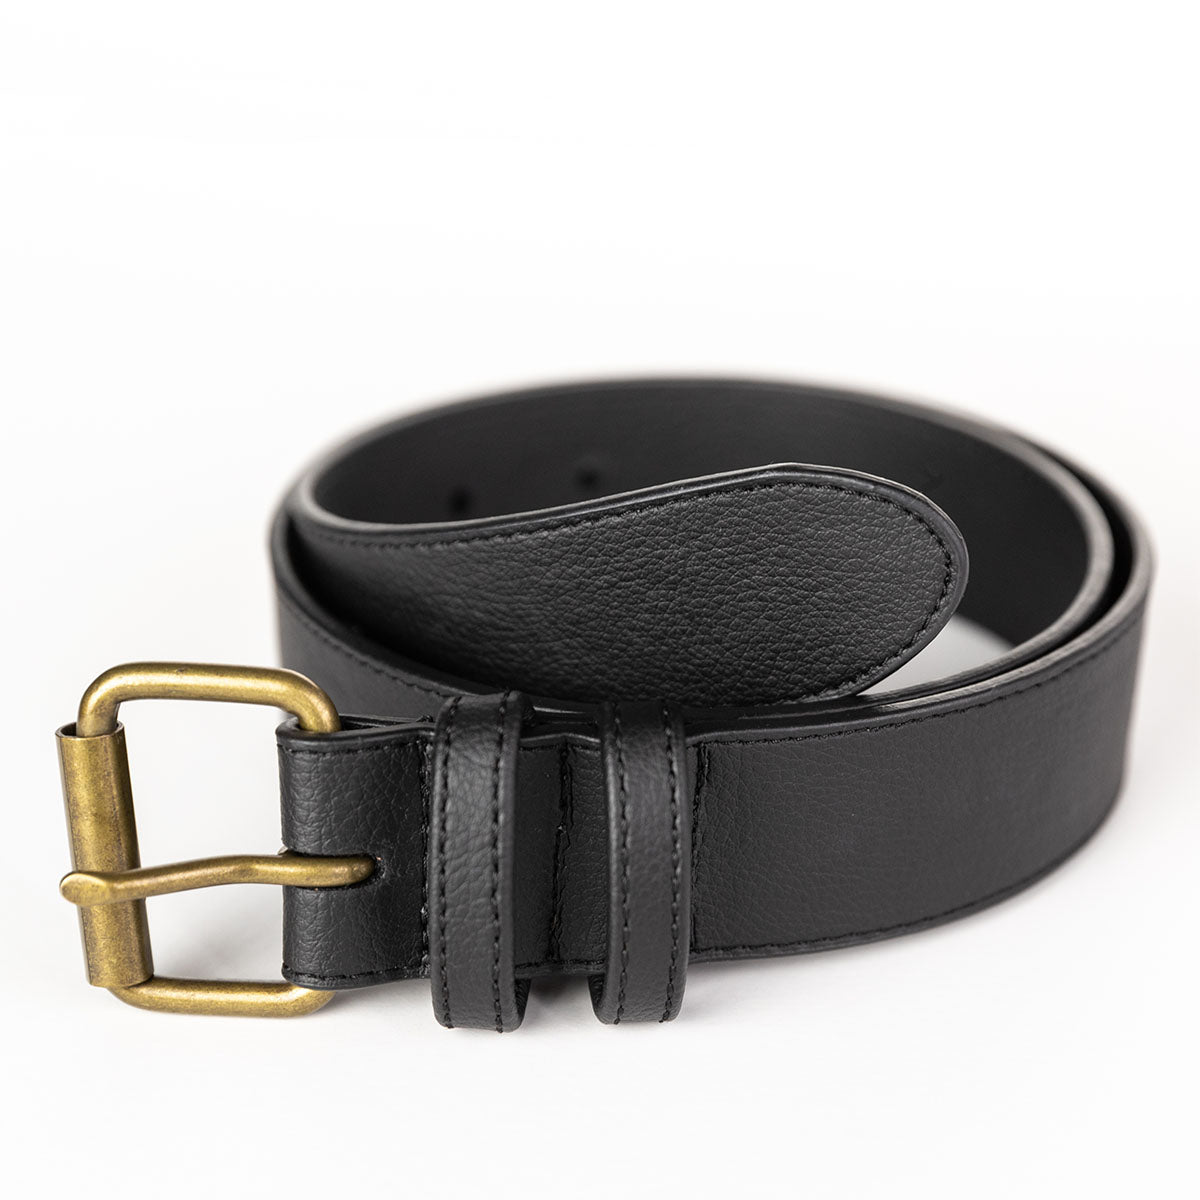 Belts, on sale, 1.5 black or brown, brass or silver buckle